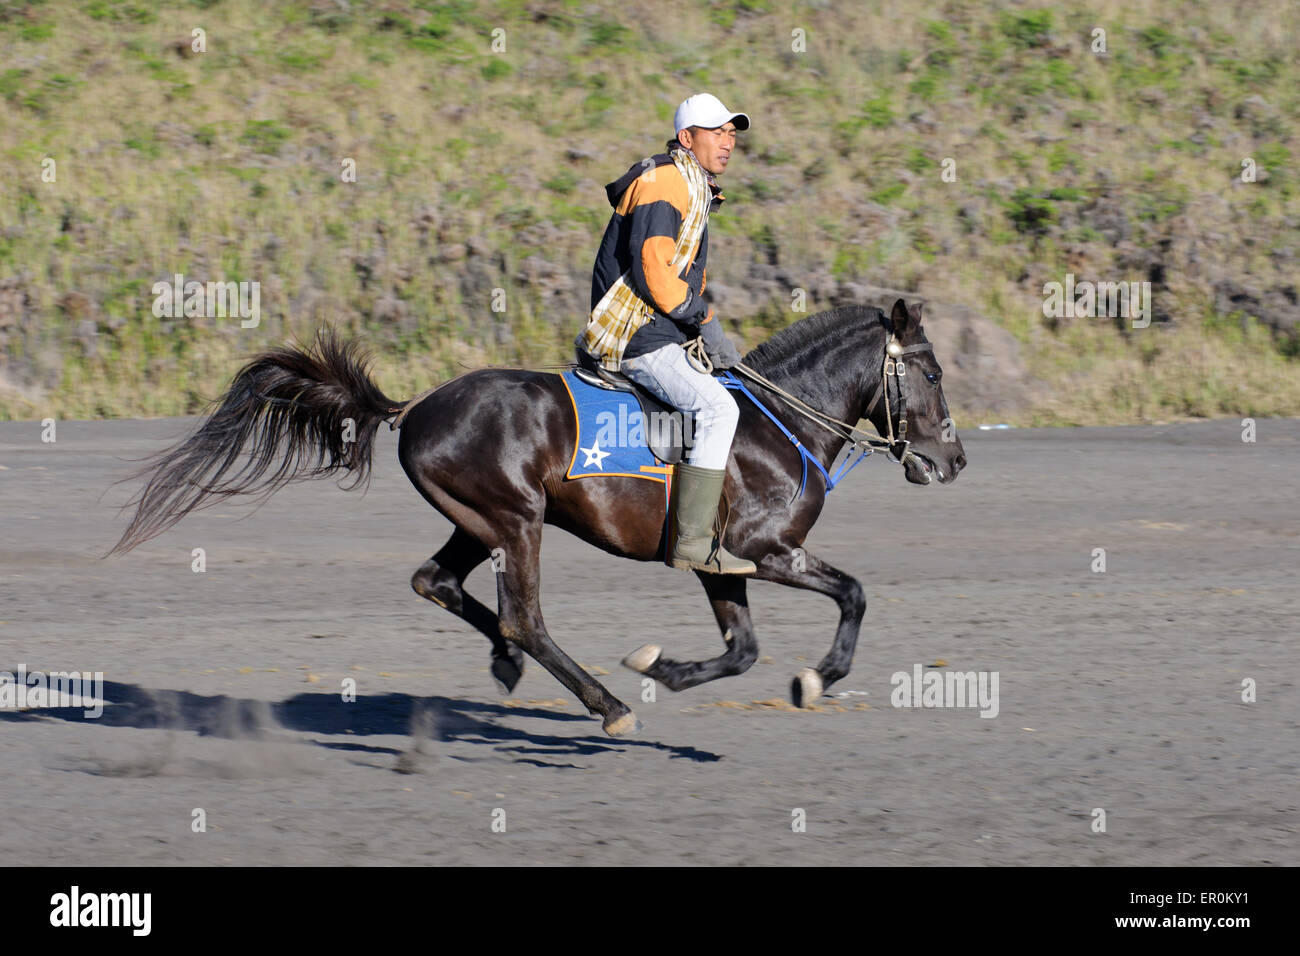 Horse riding service around Bromo. Mt. Bromo is an active volcano and part of the Tengger massif, in East Java. June 28, 2014. Stock Photo